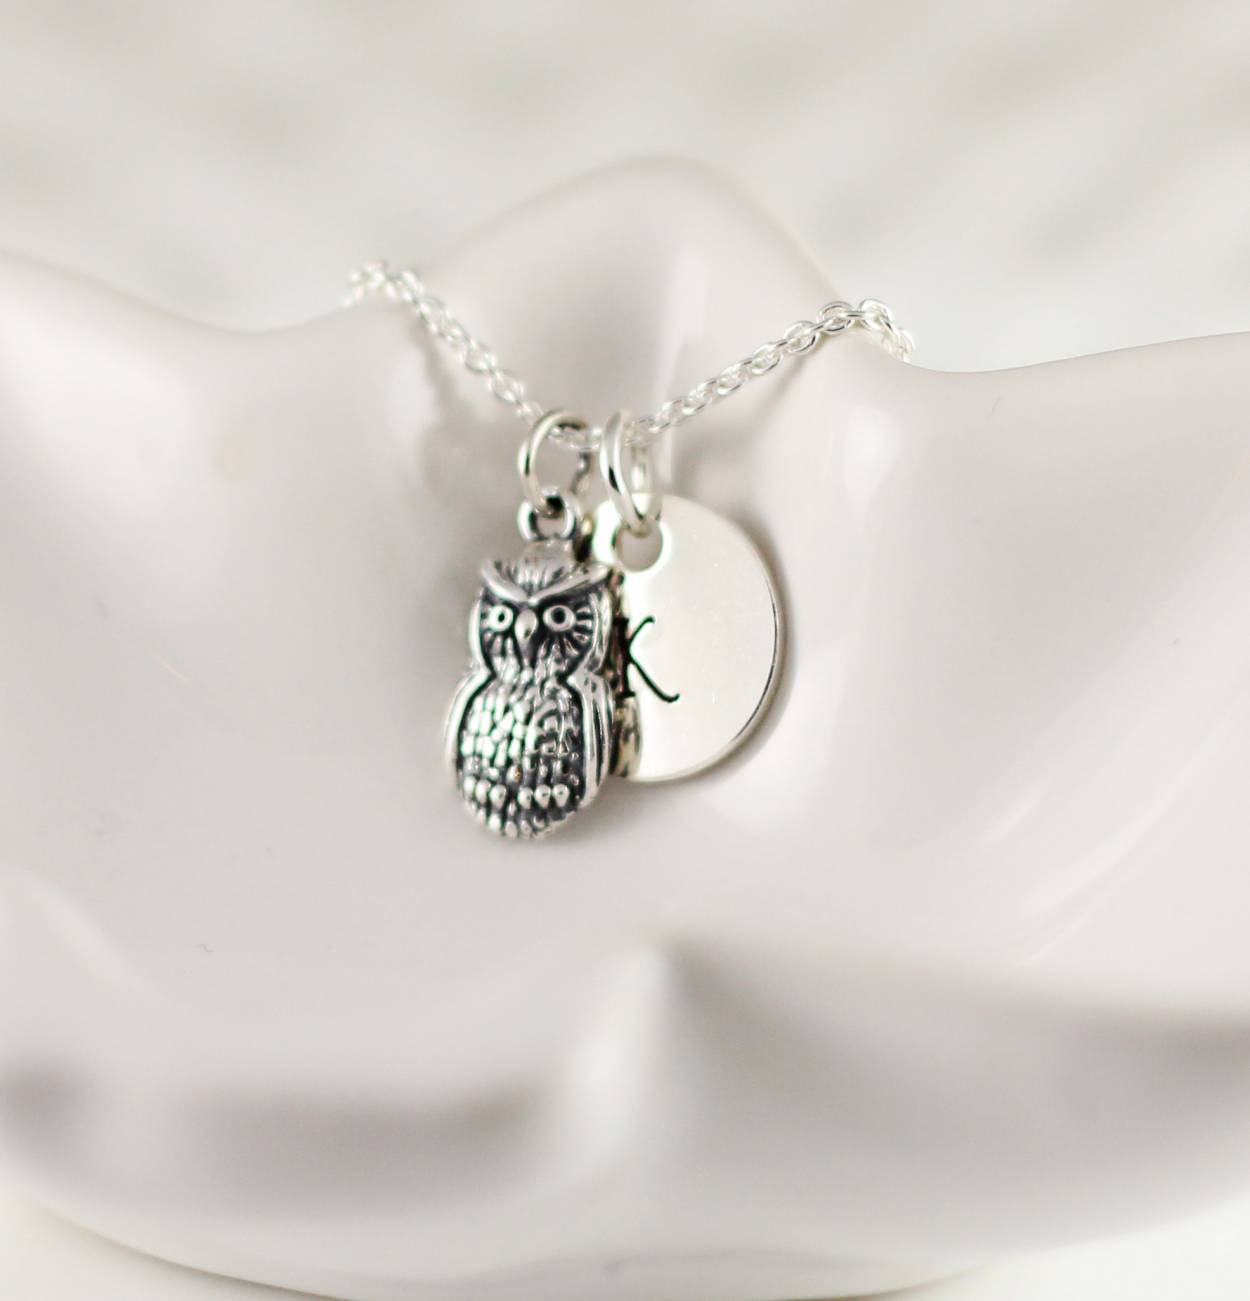 Owl Initial Necklace